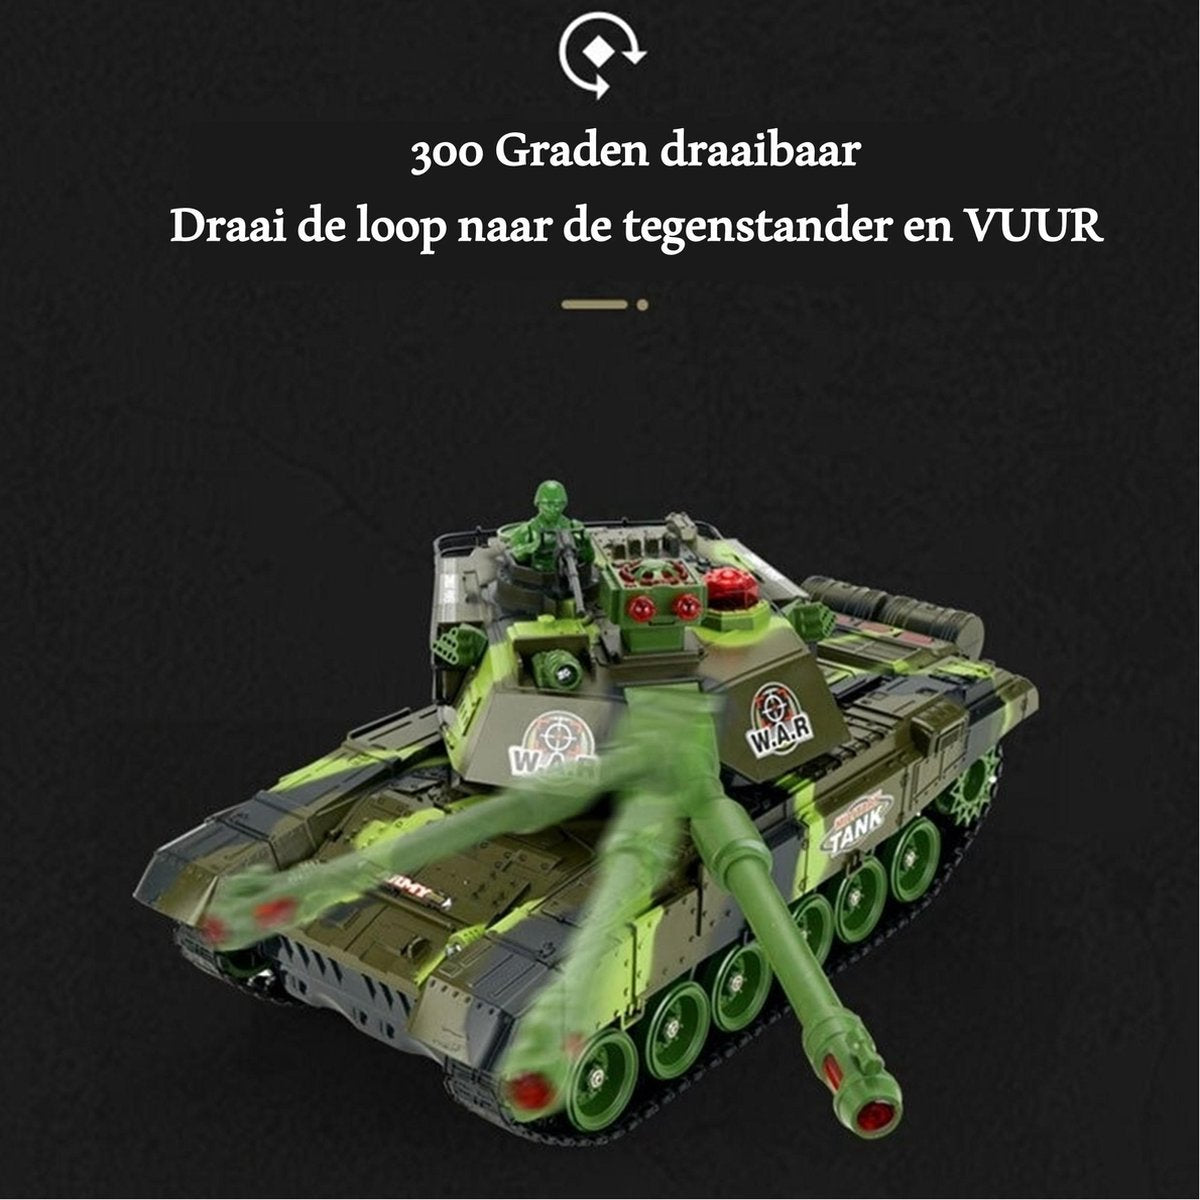 <tc>Ariko XXL RC Toy Tank - Green - Remote Controlled Radio Tank With Remote Control - With Sound & Light Effects - With Internal Battery - 2.4Gz - Scale 1:14</tc>